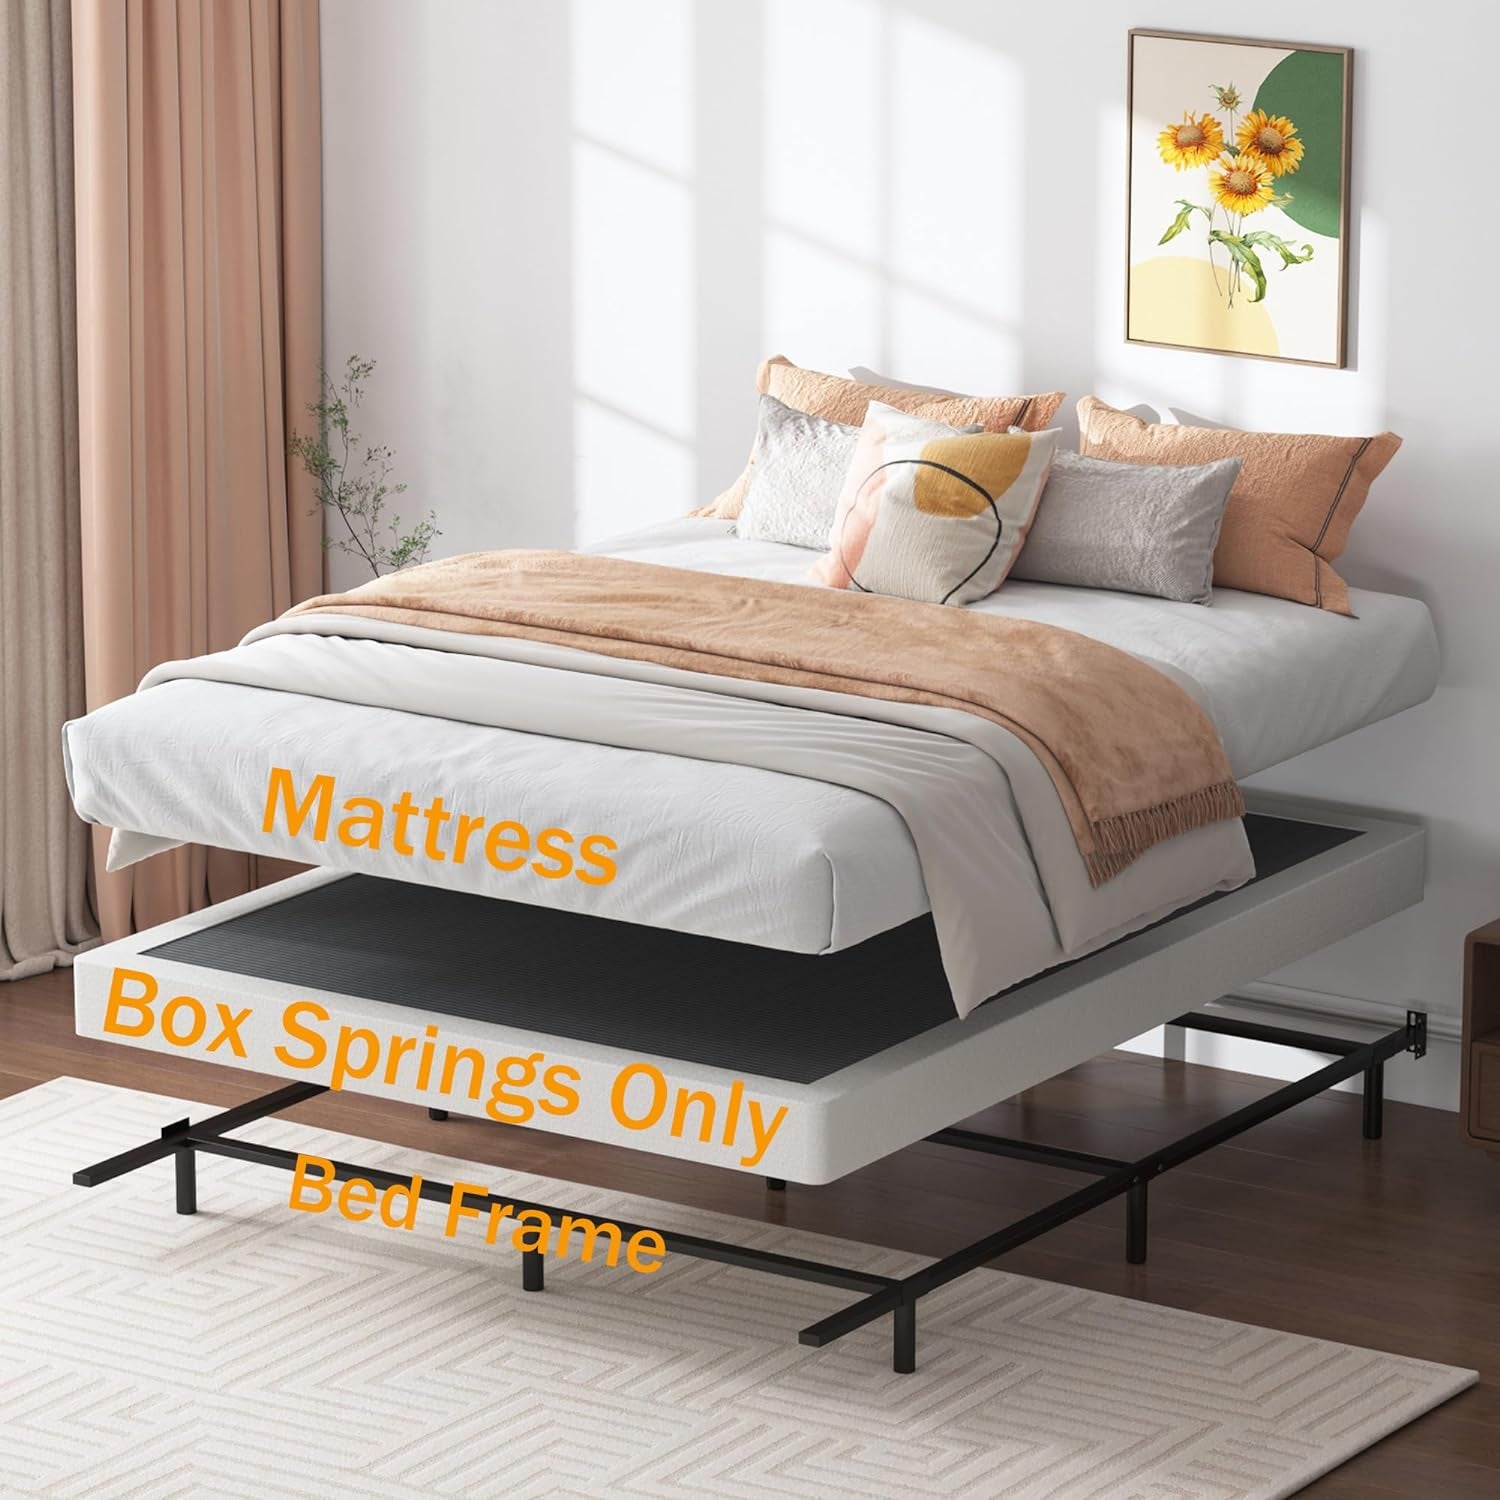 Box Springs 5 Inch Queen Box Spring Only Bed Base, Mattress Foundation, Easy Clean Fabric Cover, Non-Slip, No Noise, Easy Assembly